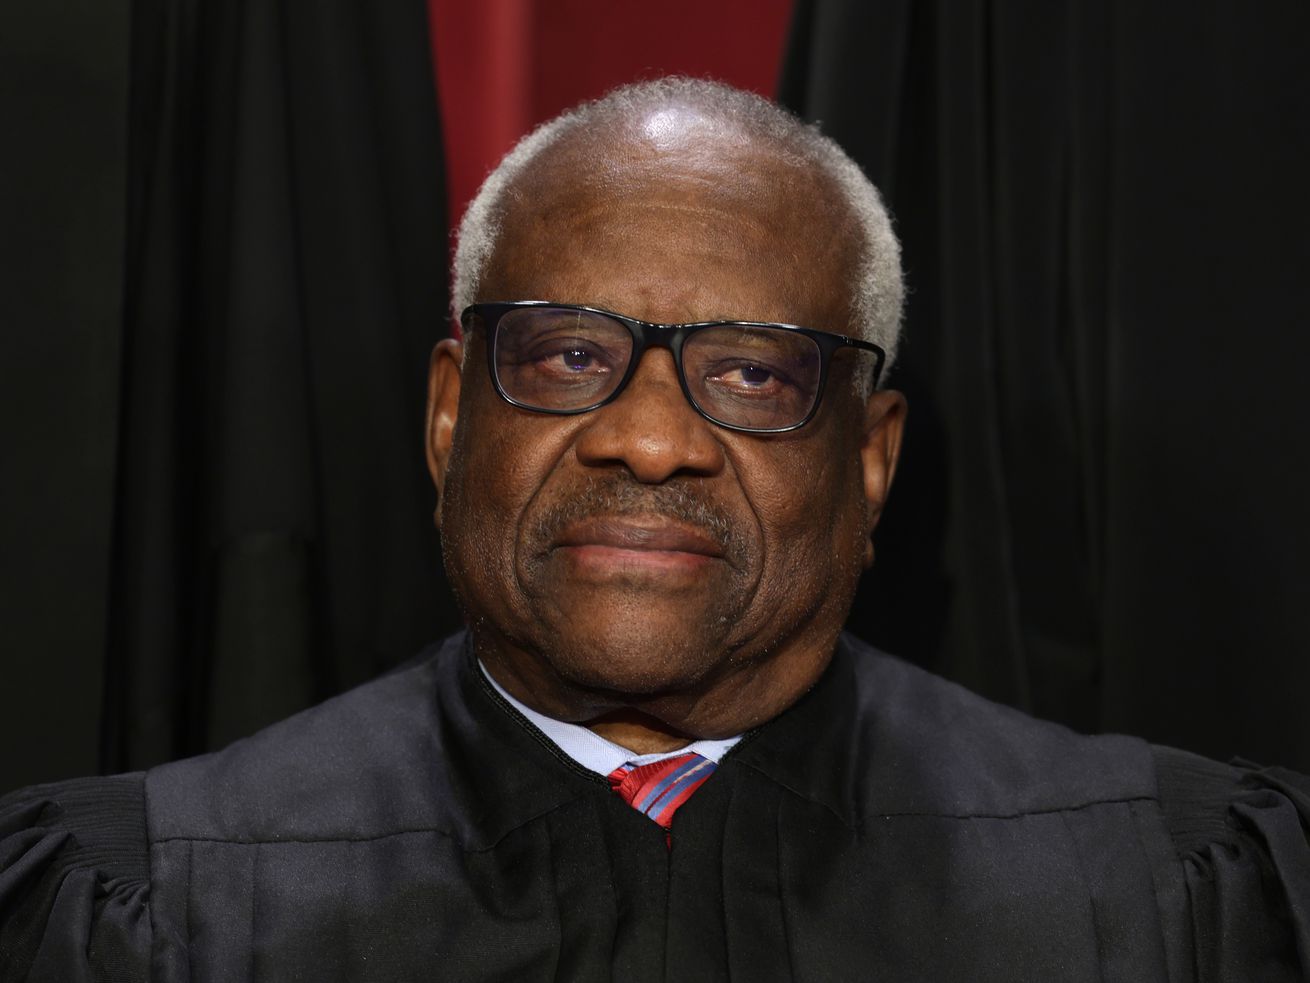 Justice Clarence Thomas in black robes, staring ahead.